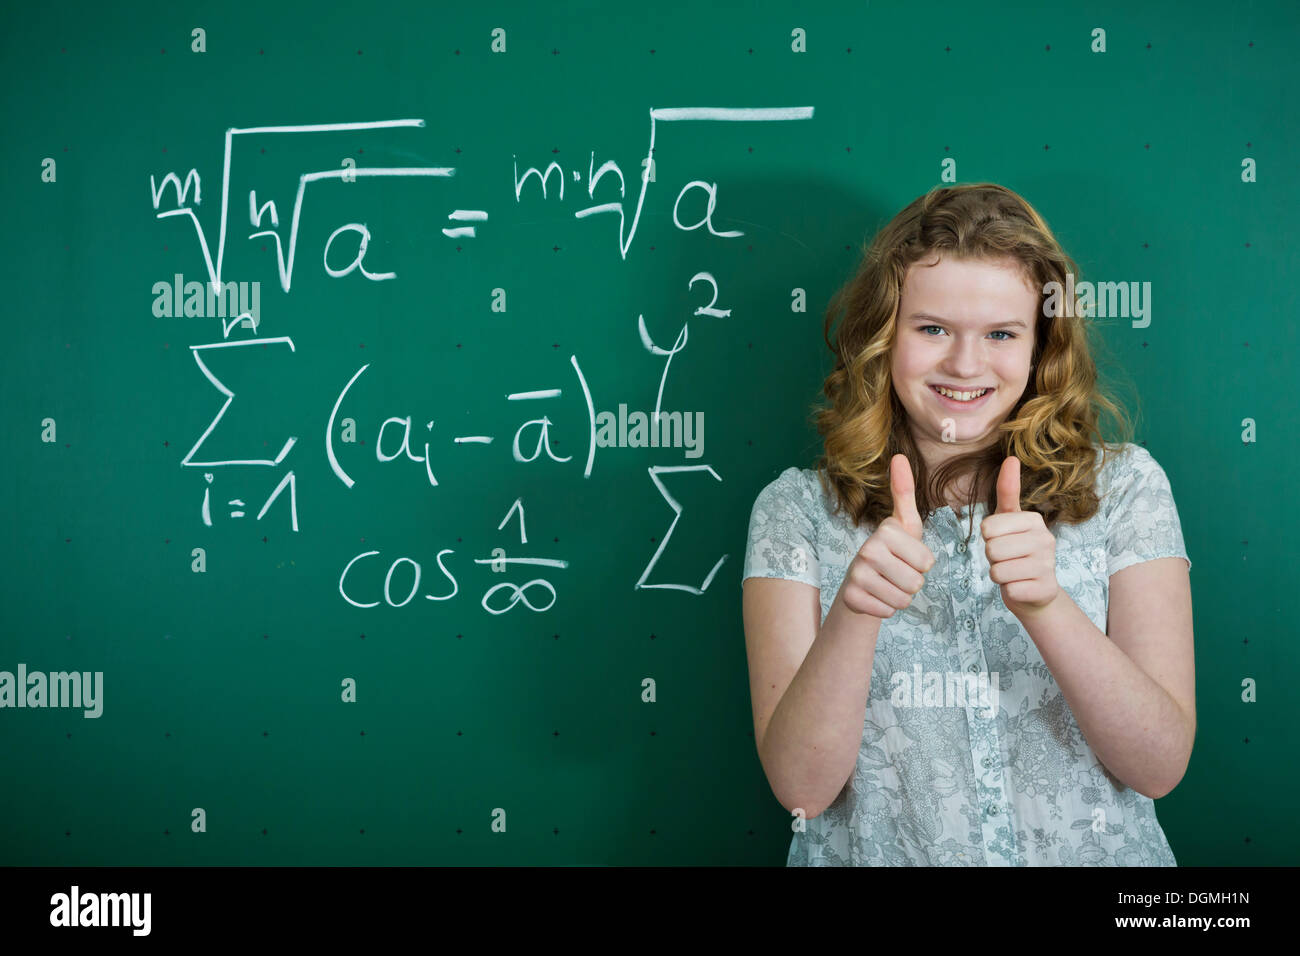 Schoolgirl standing in front of a school blackboard with mathematical formulas, making a thumbs-up gesture, Germany Stock Photo